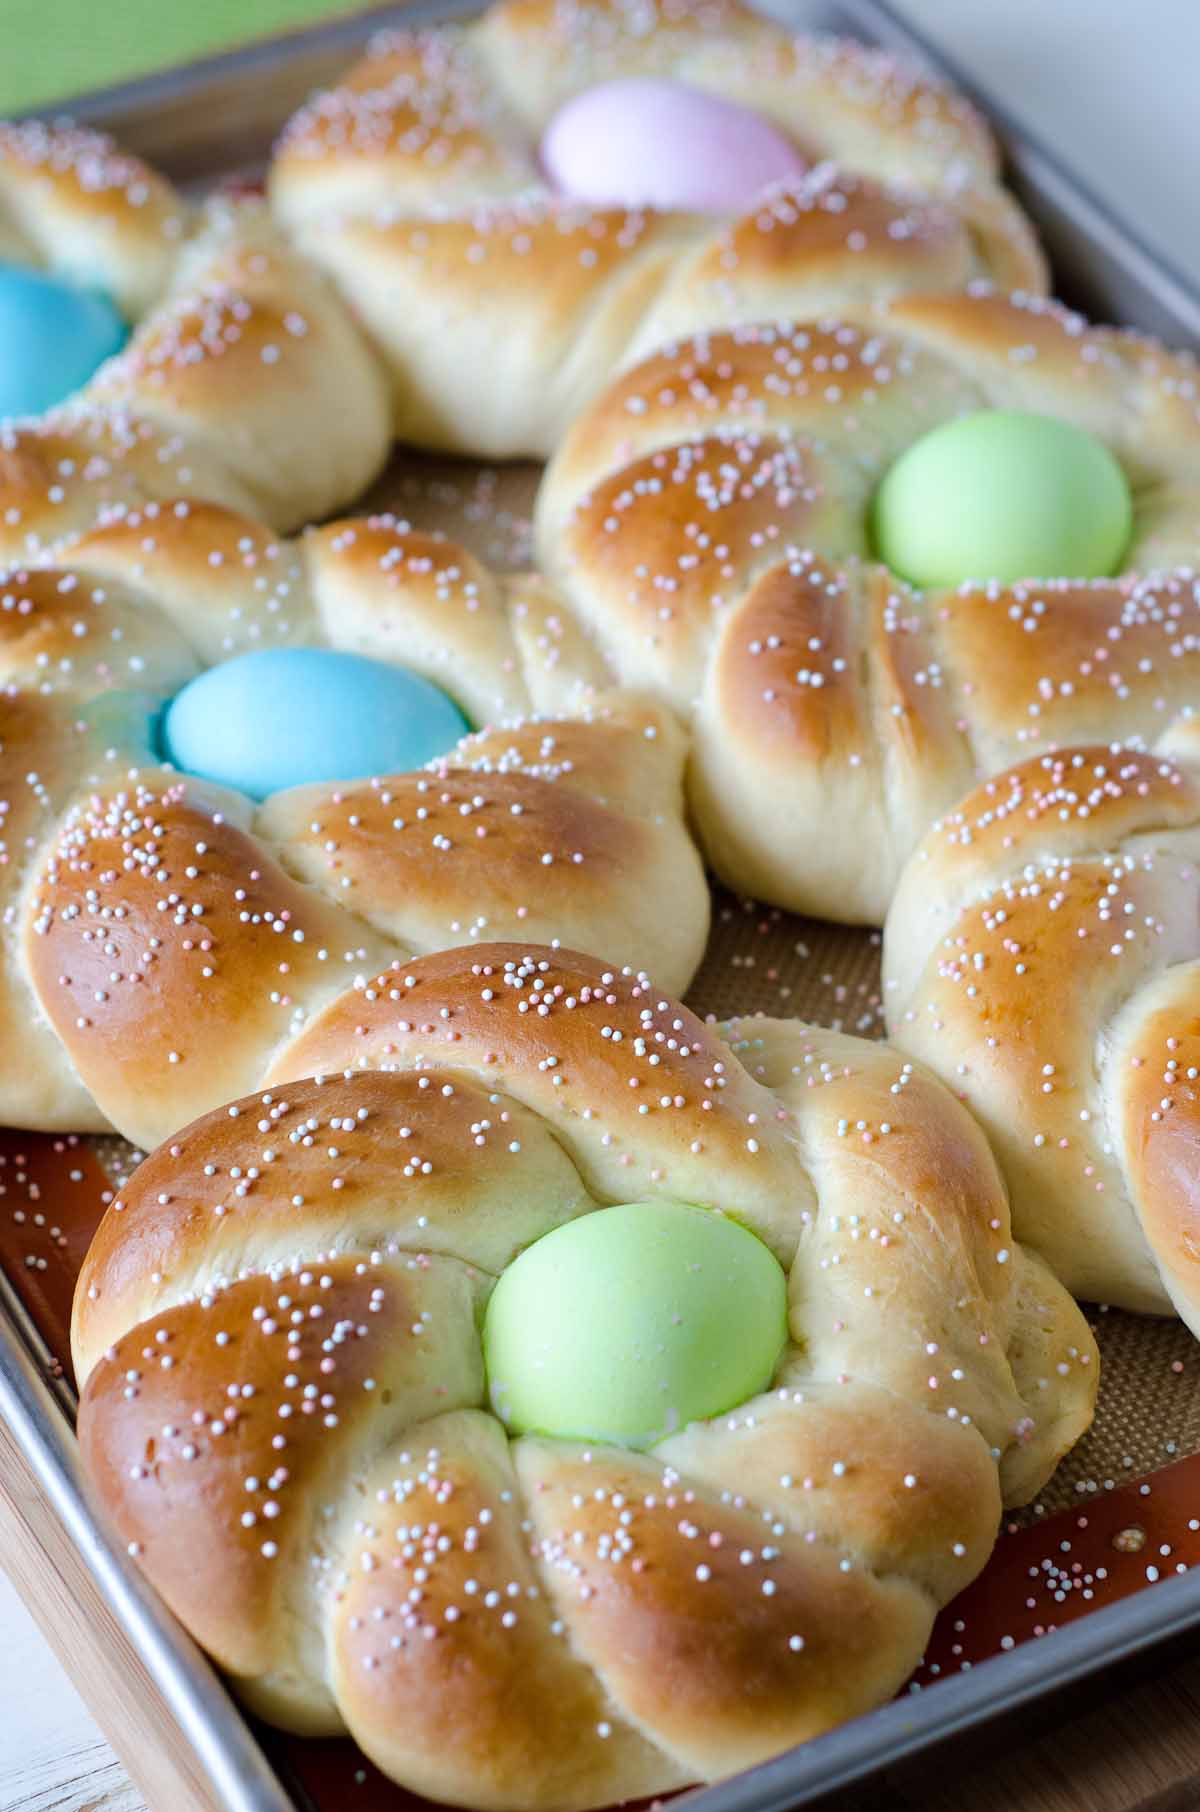 braided Italian Easter bread with dyed eggs in the center